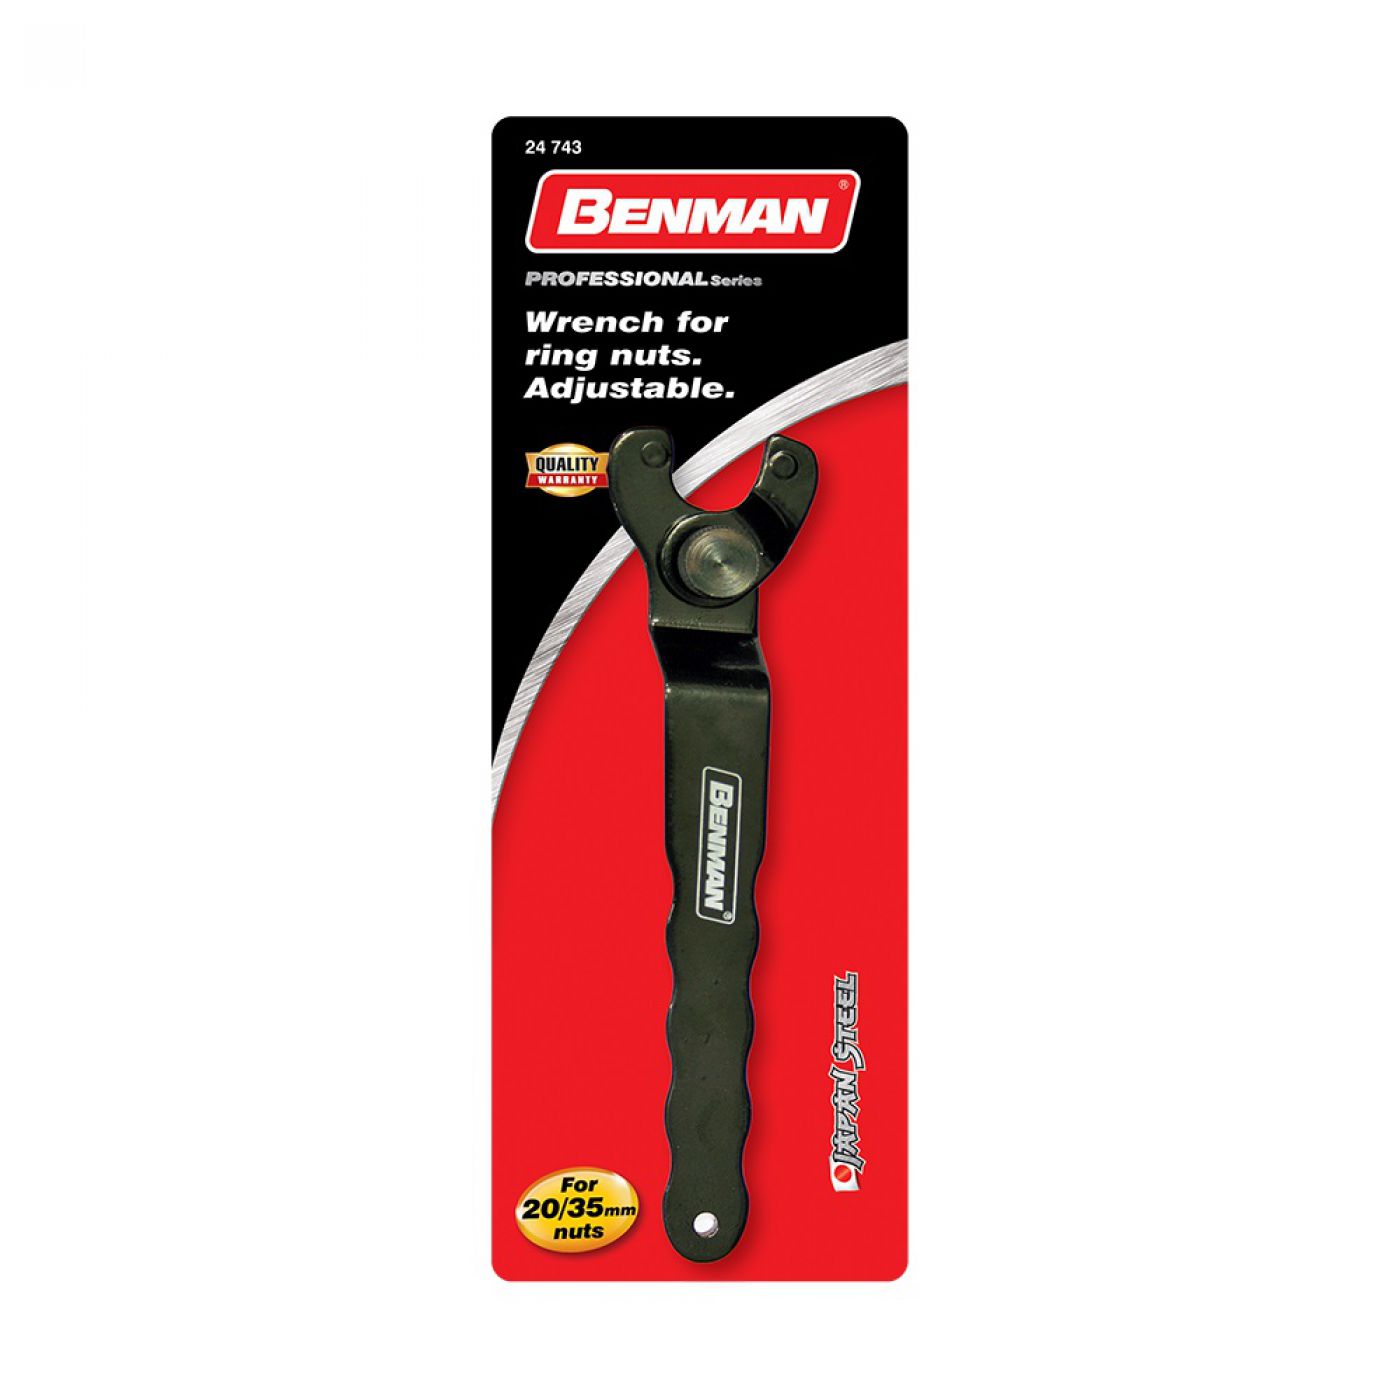 Adjustable Wrench For Ring Nuts (grinders)